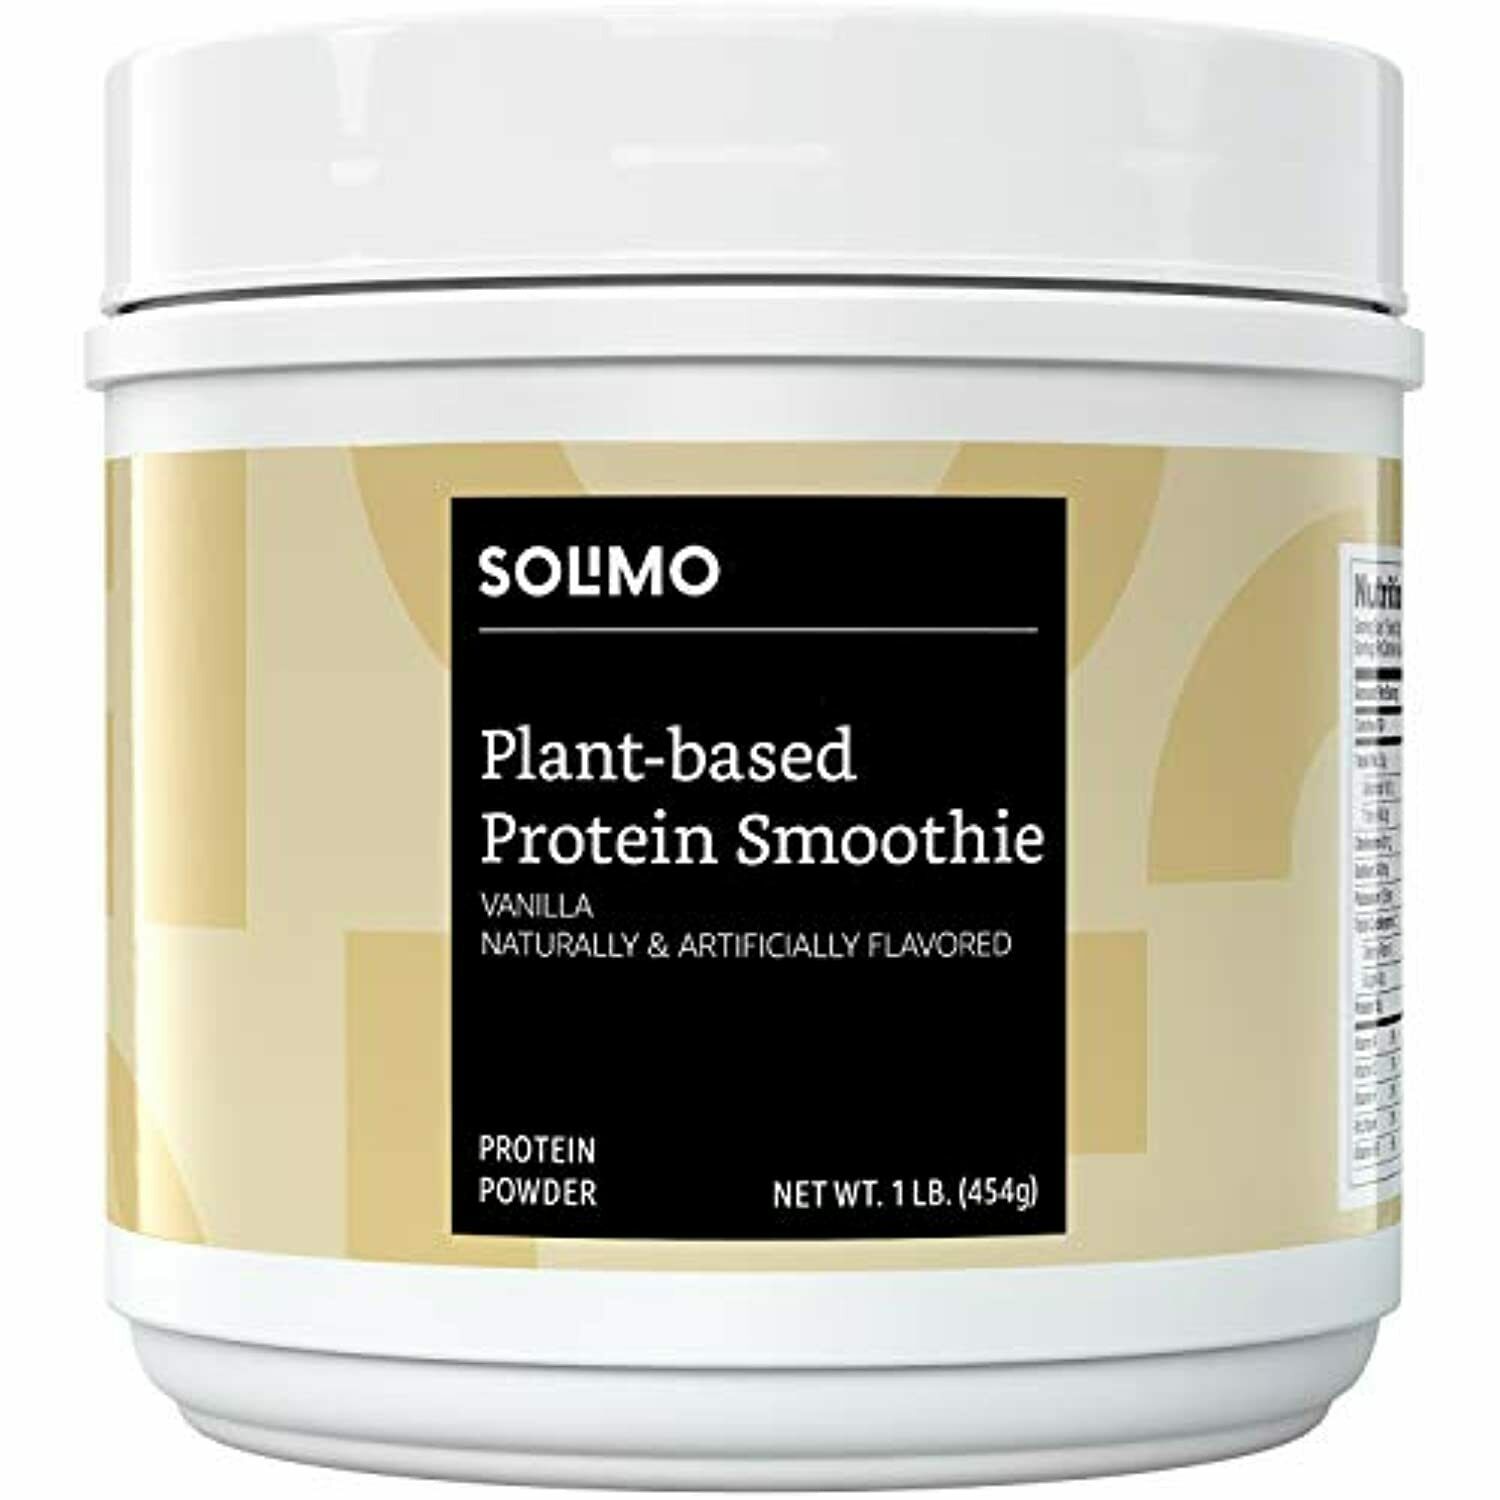 Solimo Plant-based Protein Smoothie Powder, Vanilla, 1 Pound (pack Of 1) (13